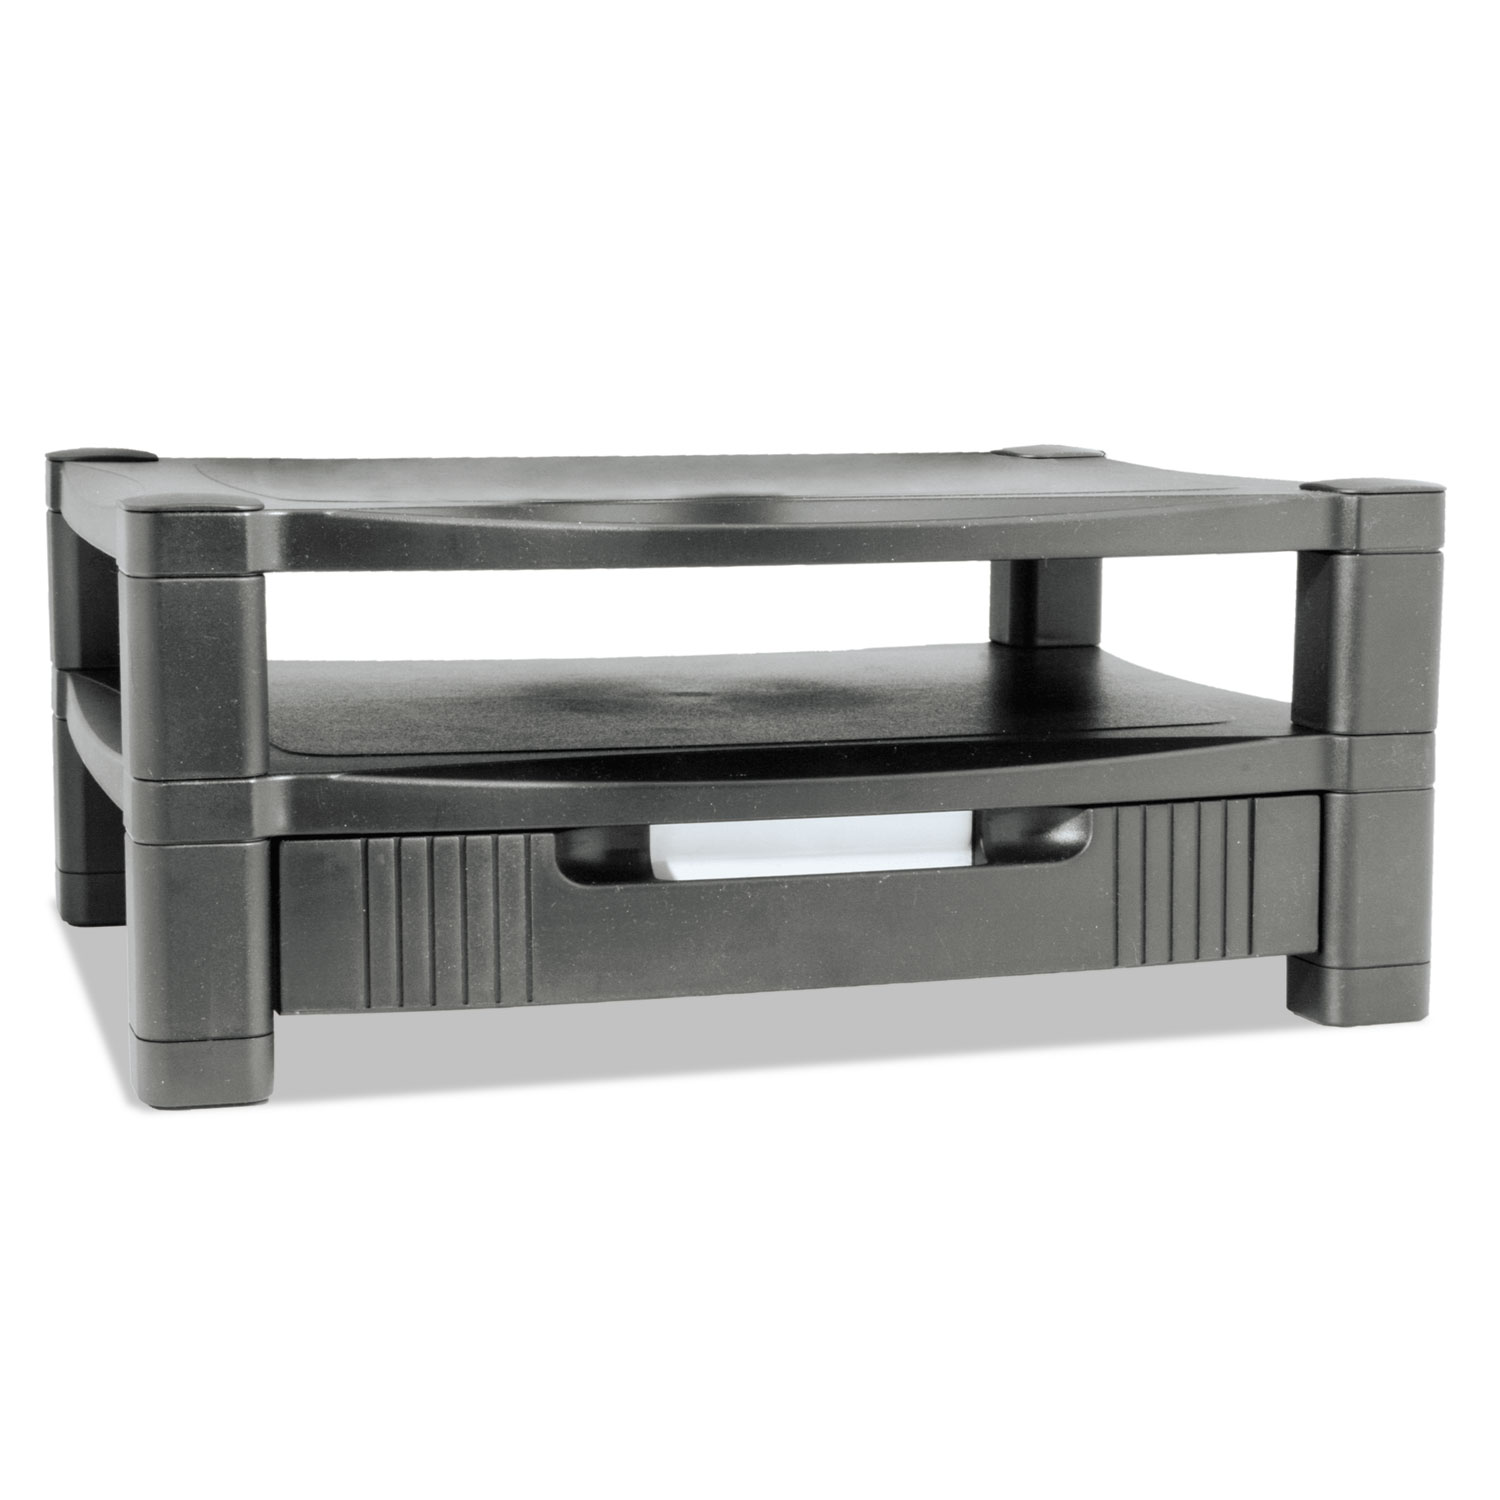 Two Level Stand, Removable Drawer, 17 x 13 1/4 x 3-1/2 to 7, Black